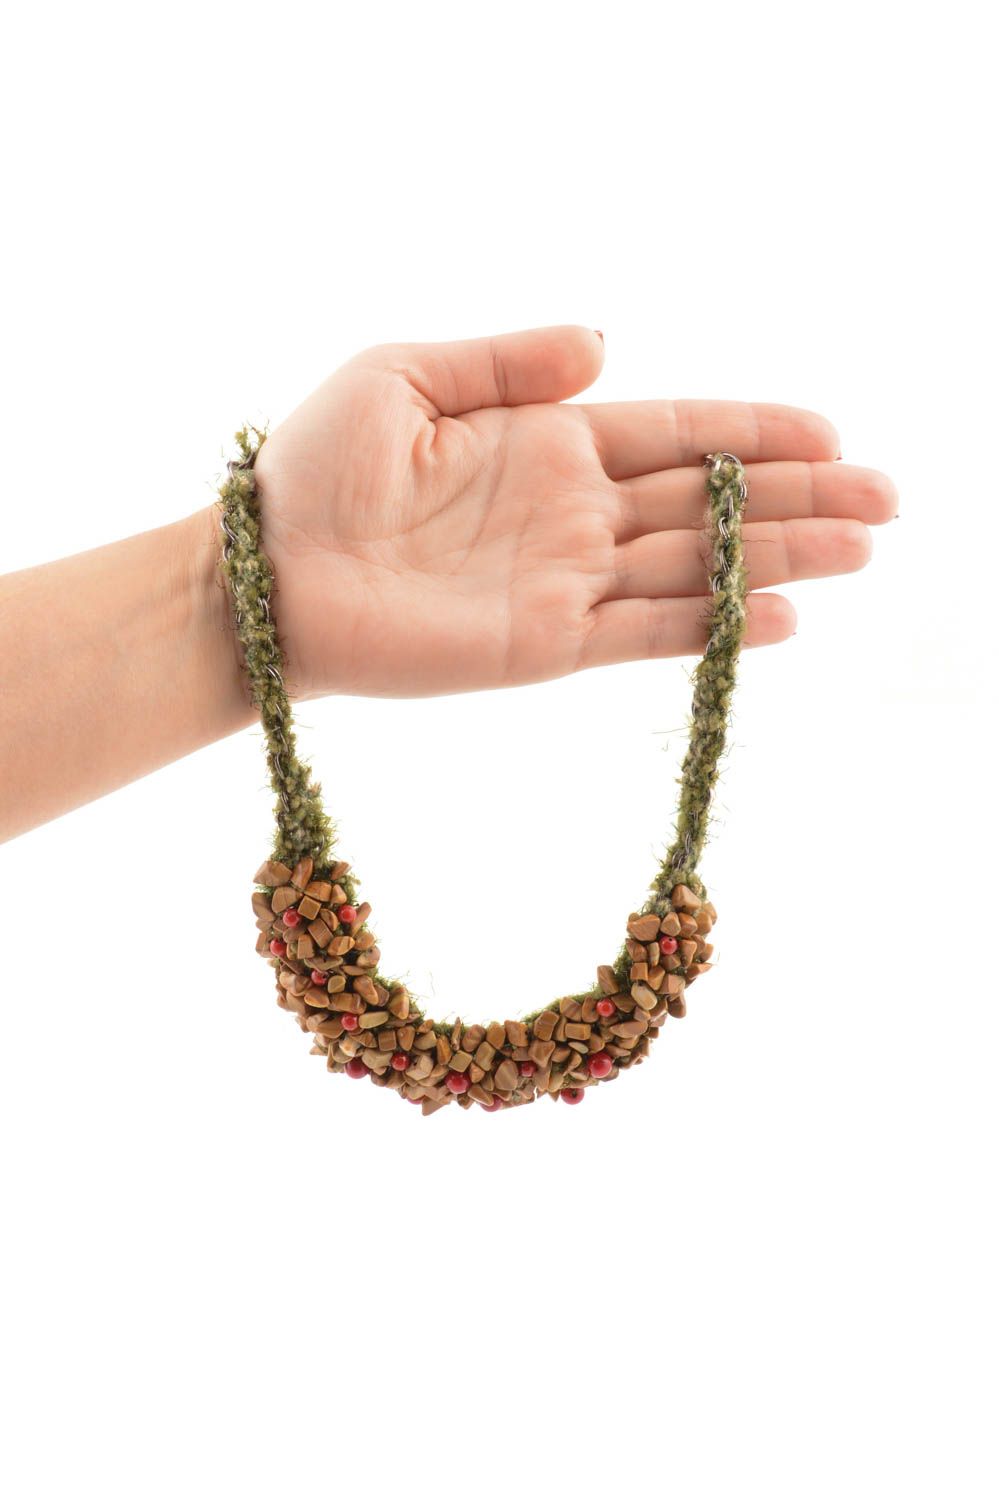 Handmade beads long beads with natural stones design textile necklace with beads photo 5